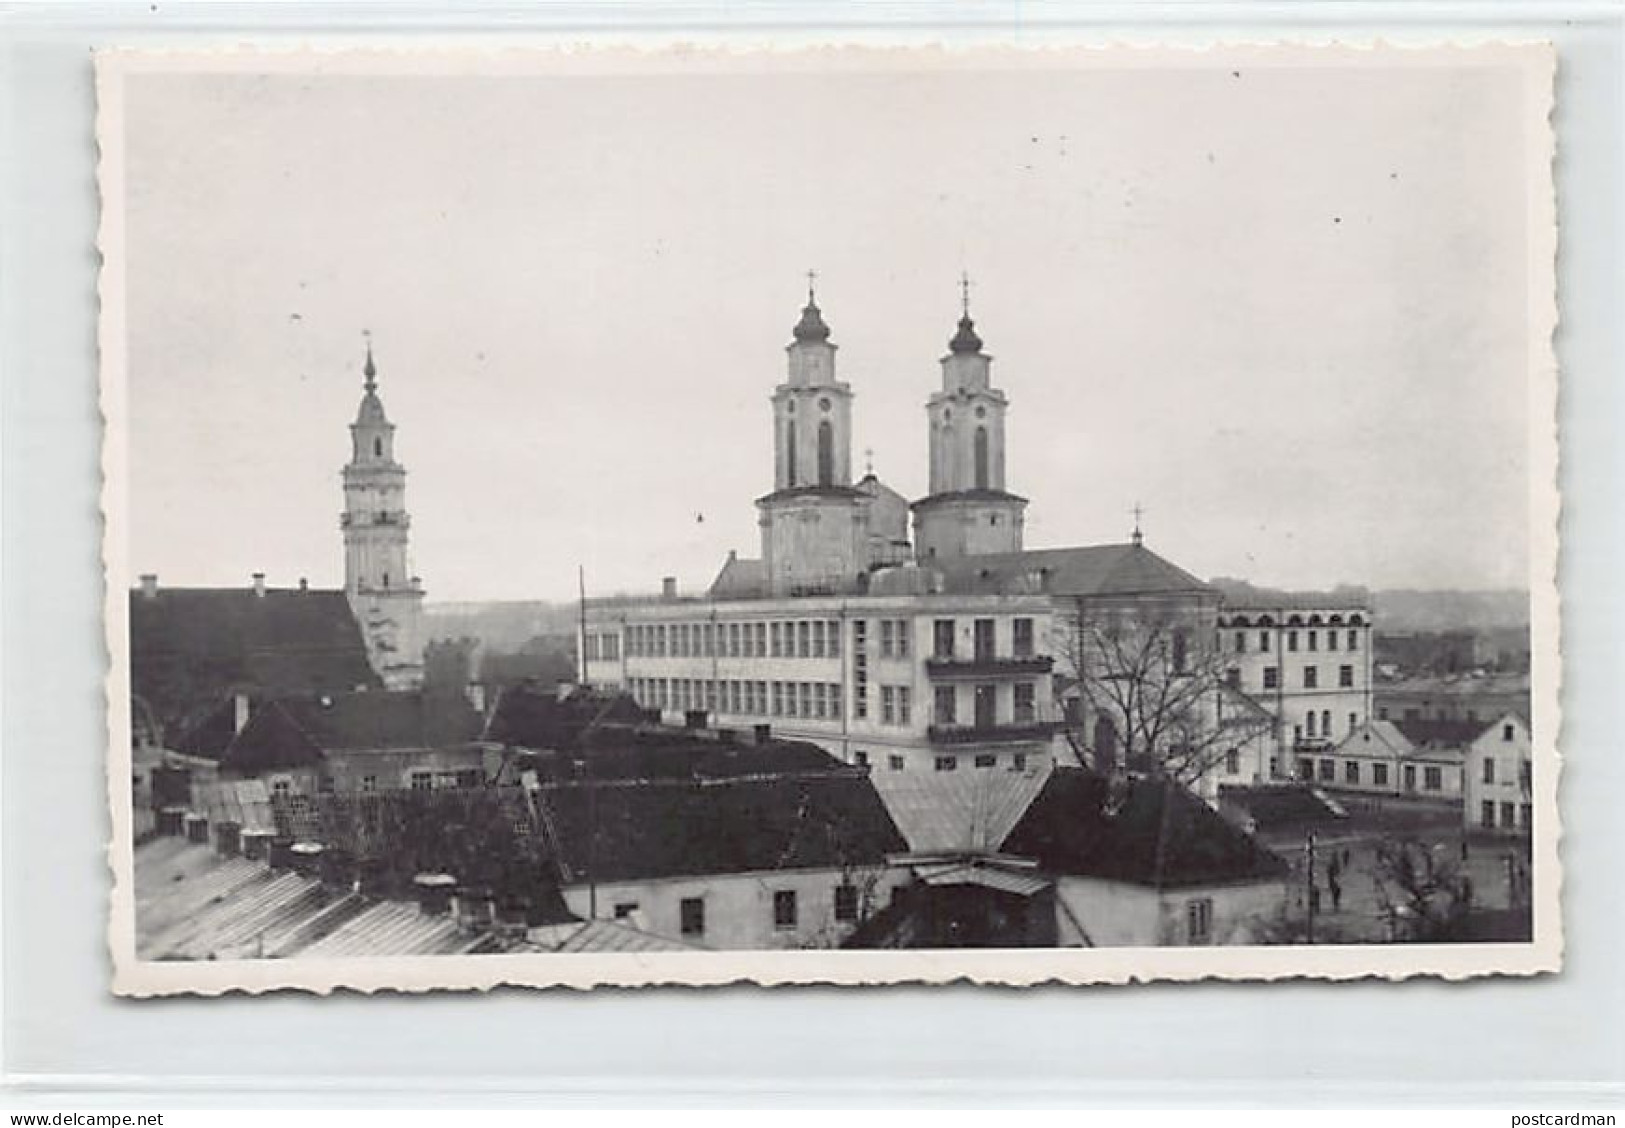 Lithuania - KAUNAS - St. Stanislas Church Of The Jesuits' College - Aerial View - REAL PHOTO  - Lithuania